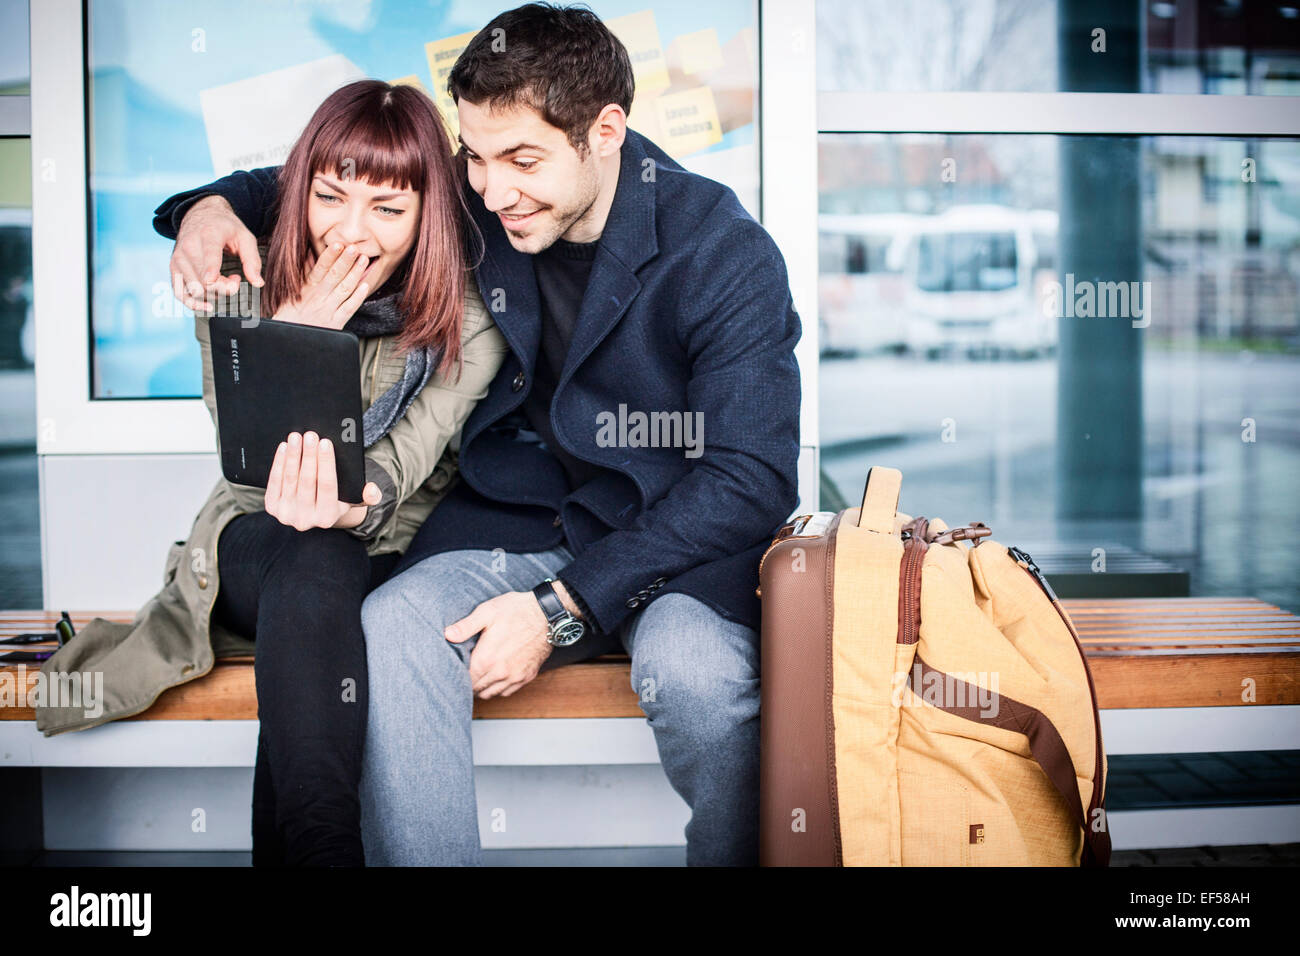 Young couple outdoors Banque D'Images